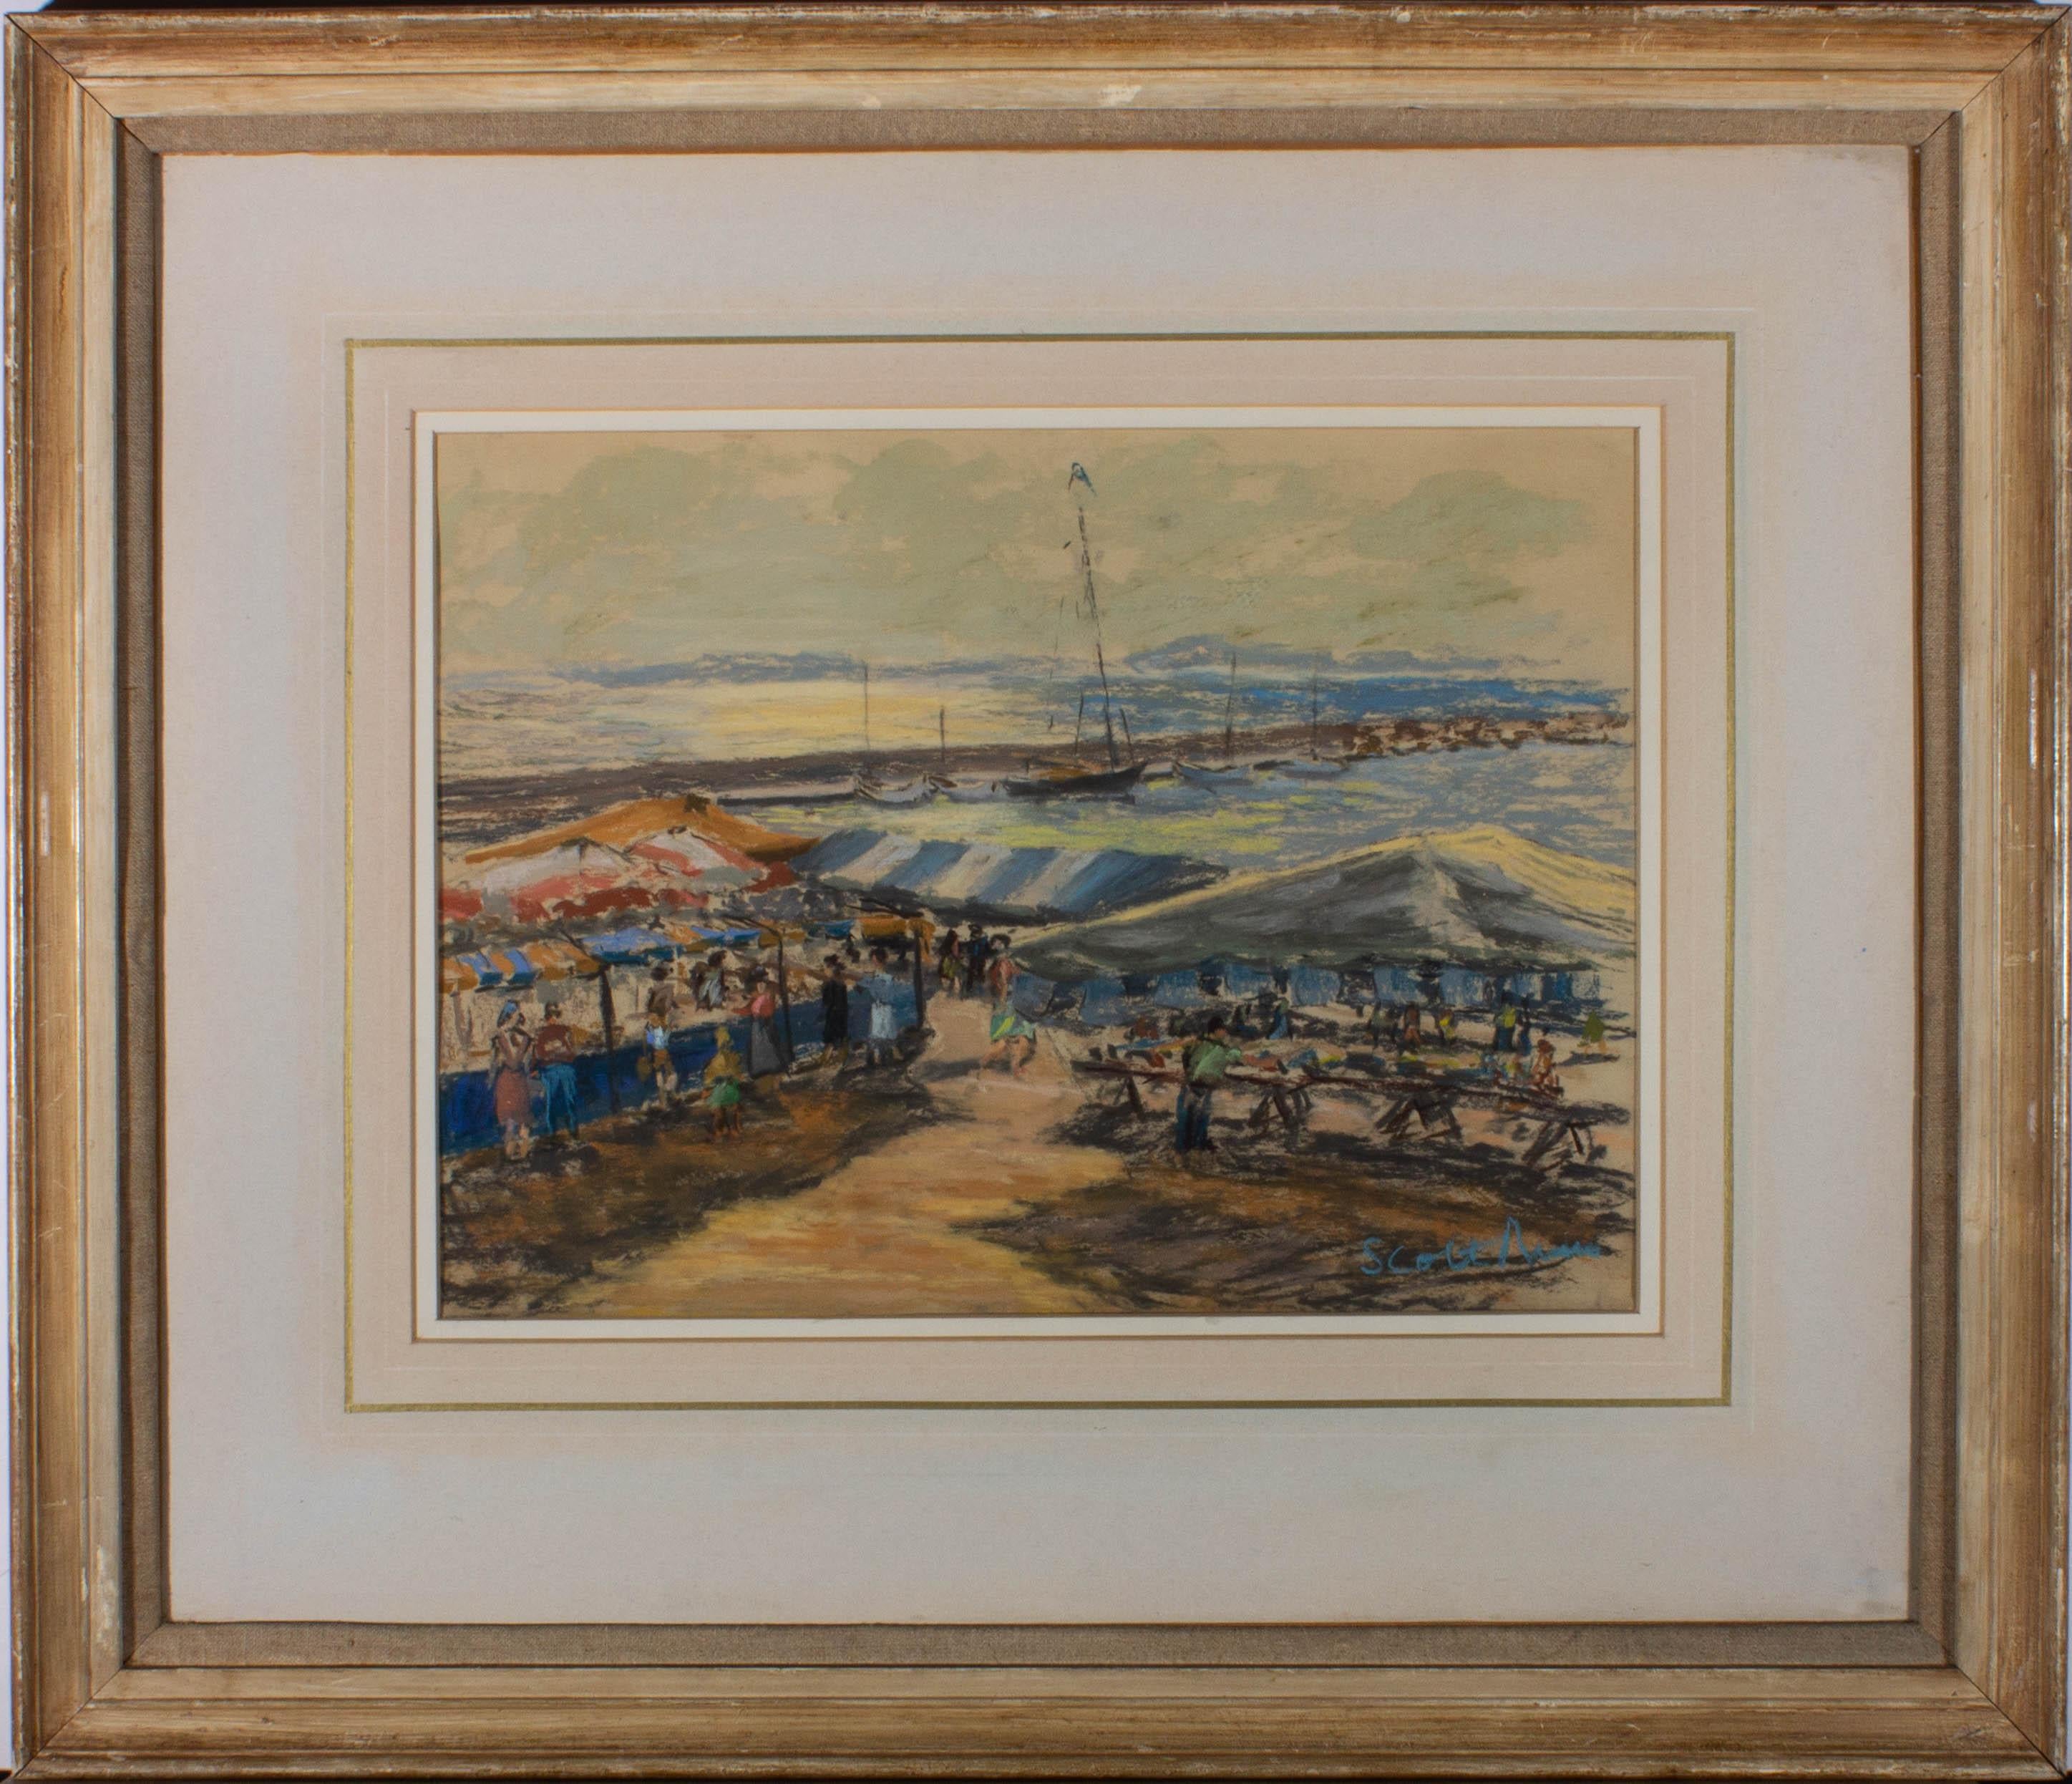 A bustling scene depicting the market at Le Lavandou, France. The seaside town is renowned for its plentiful market and beautiful beach. This pastel drawing shows market stalls set up by the boardwalk with small sailing boats in the background.